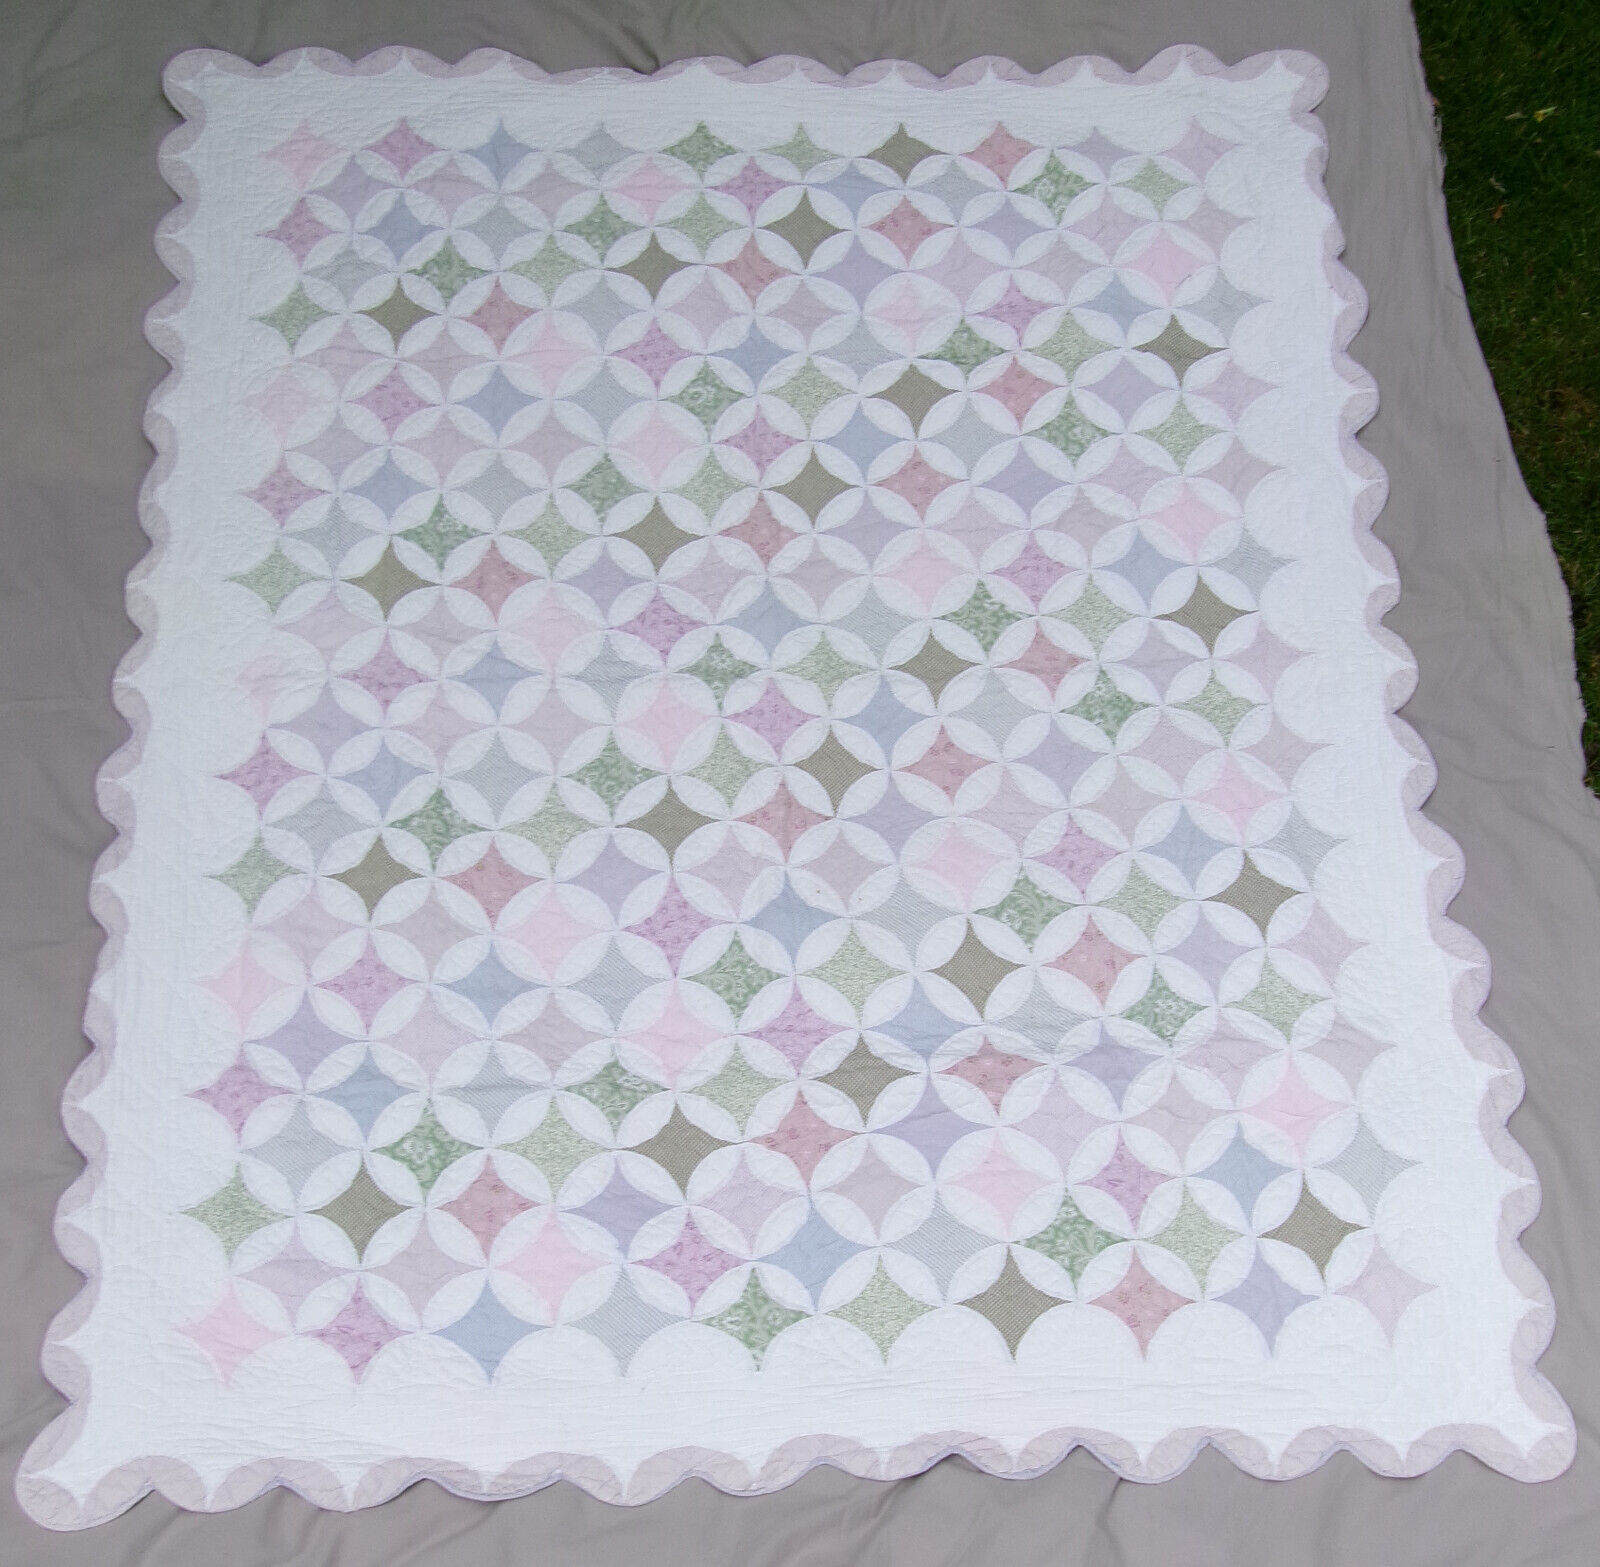 VTG 50S 60S CATHEDRAL WINDOWS QUILT 85X69 DOUBLE HANDMADE BLANKET SCALLOP EDGE